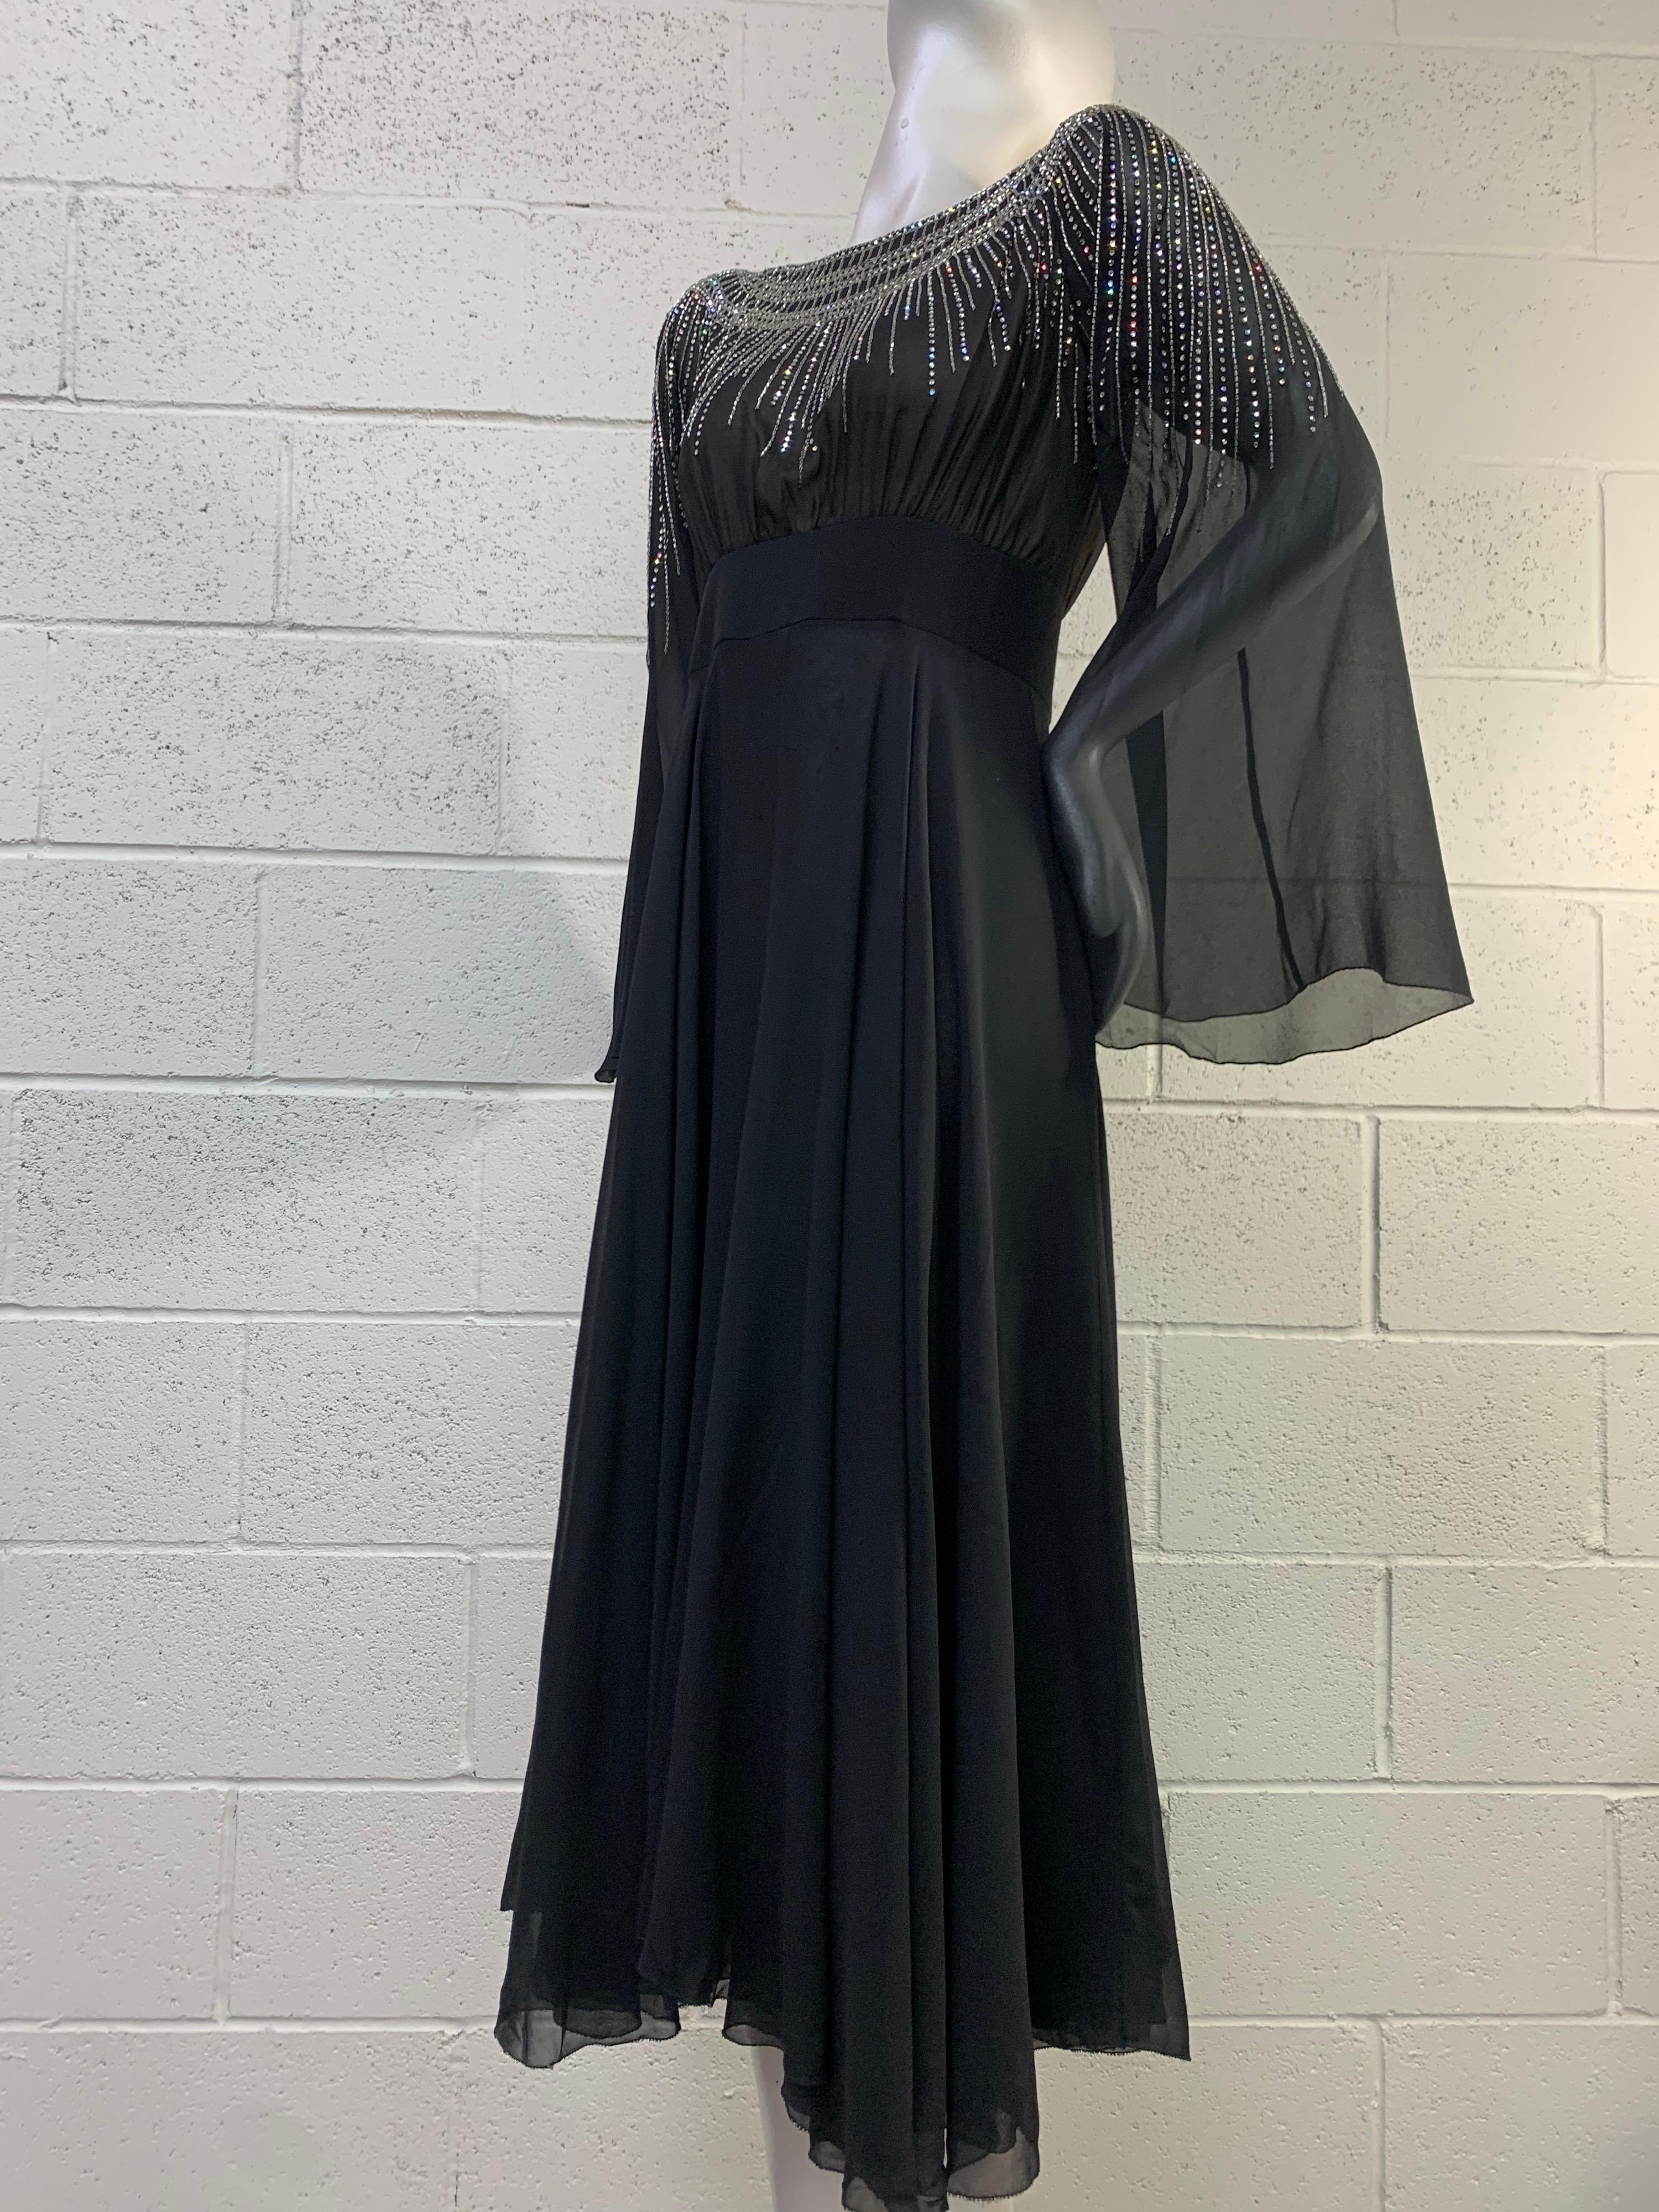 1970 Pauline Trigere Black Silk Chiffon 30s-Inspired Dress w/ Beaded Starburst In Excellent Condition For Sale In Gresham, OR